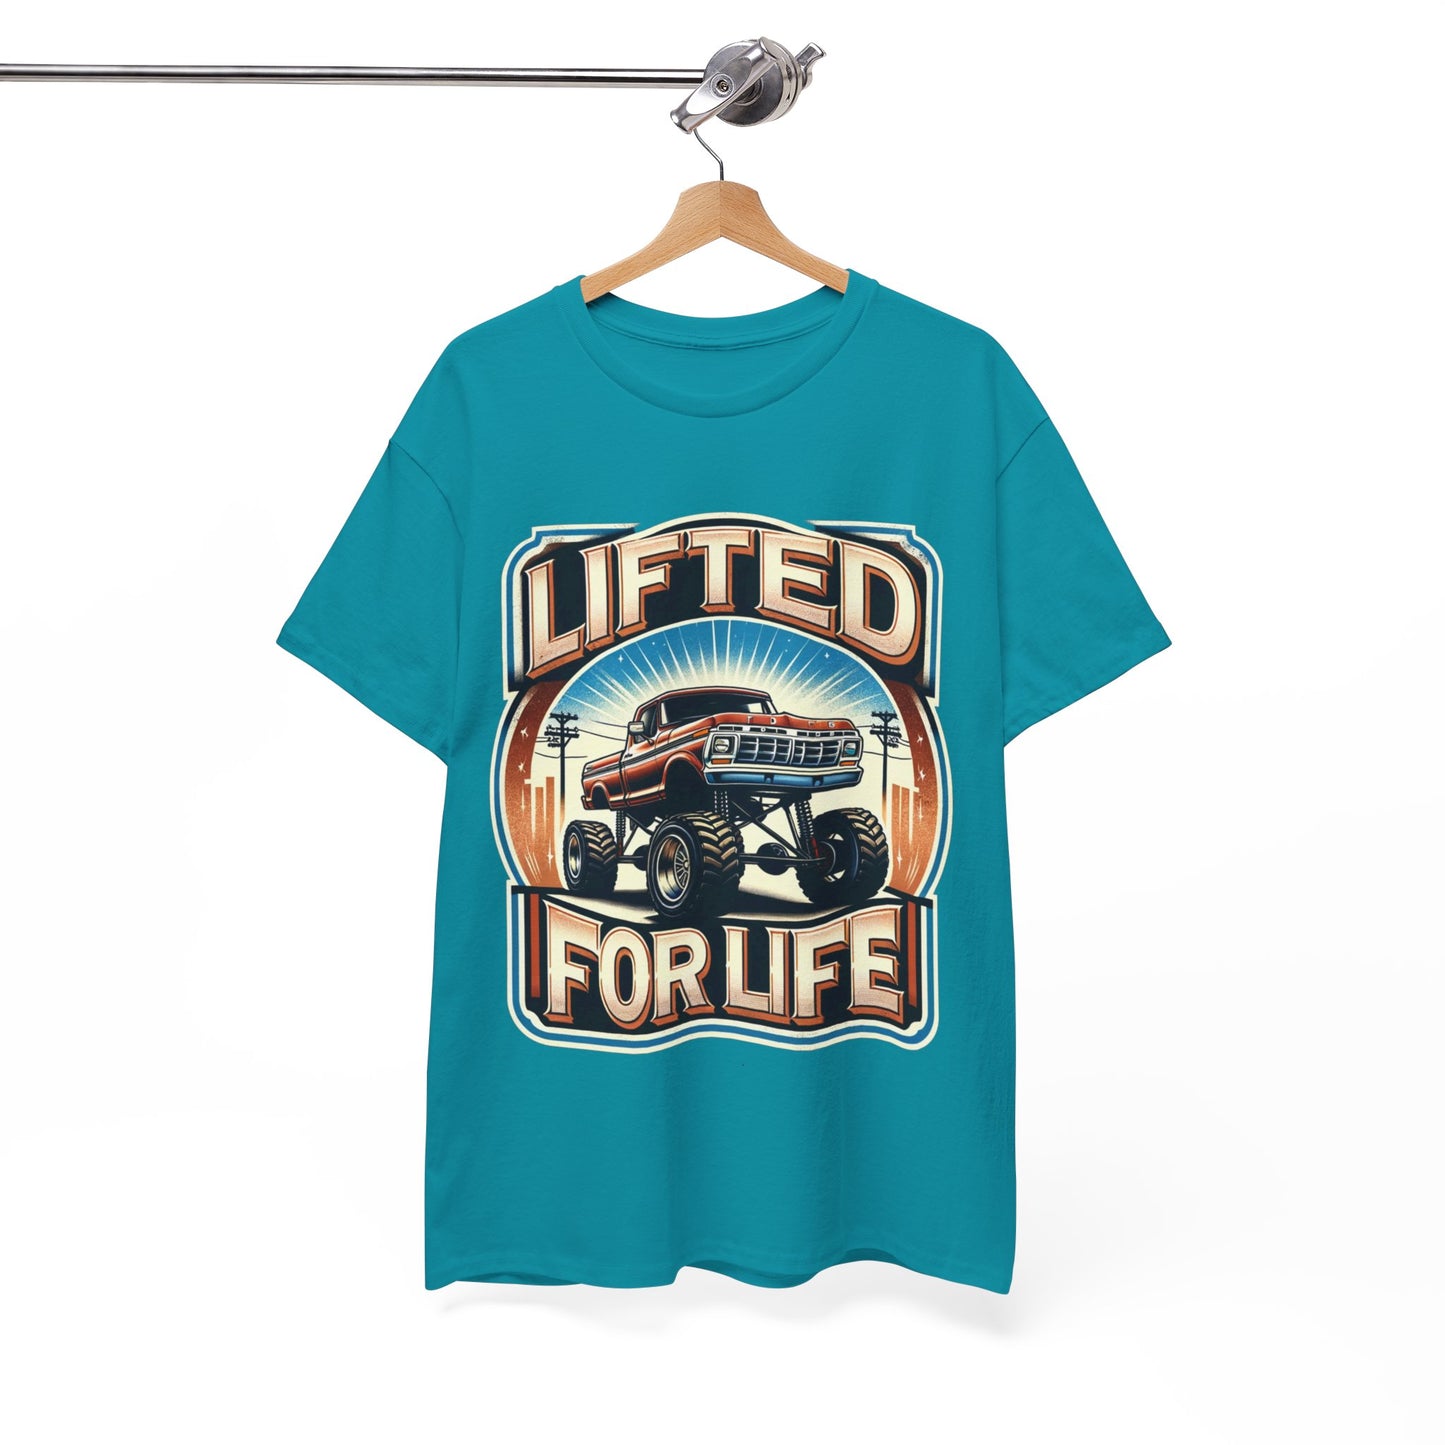 Y.M.L.Y. "Lifted For Life" T-Shirts Lifted Truck T-Shirt Truck Fan T-Shirt Classic Cotton Tee